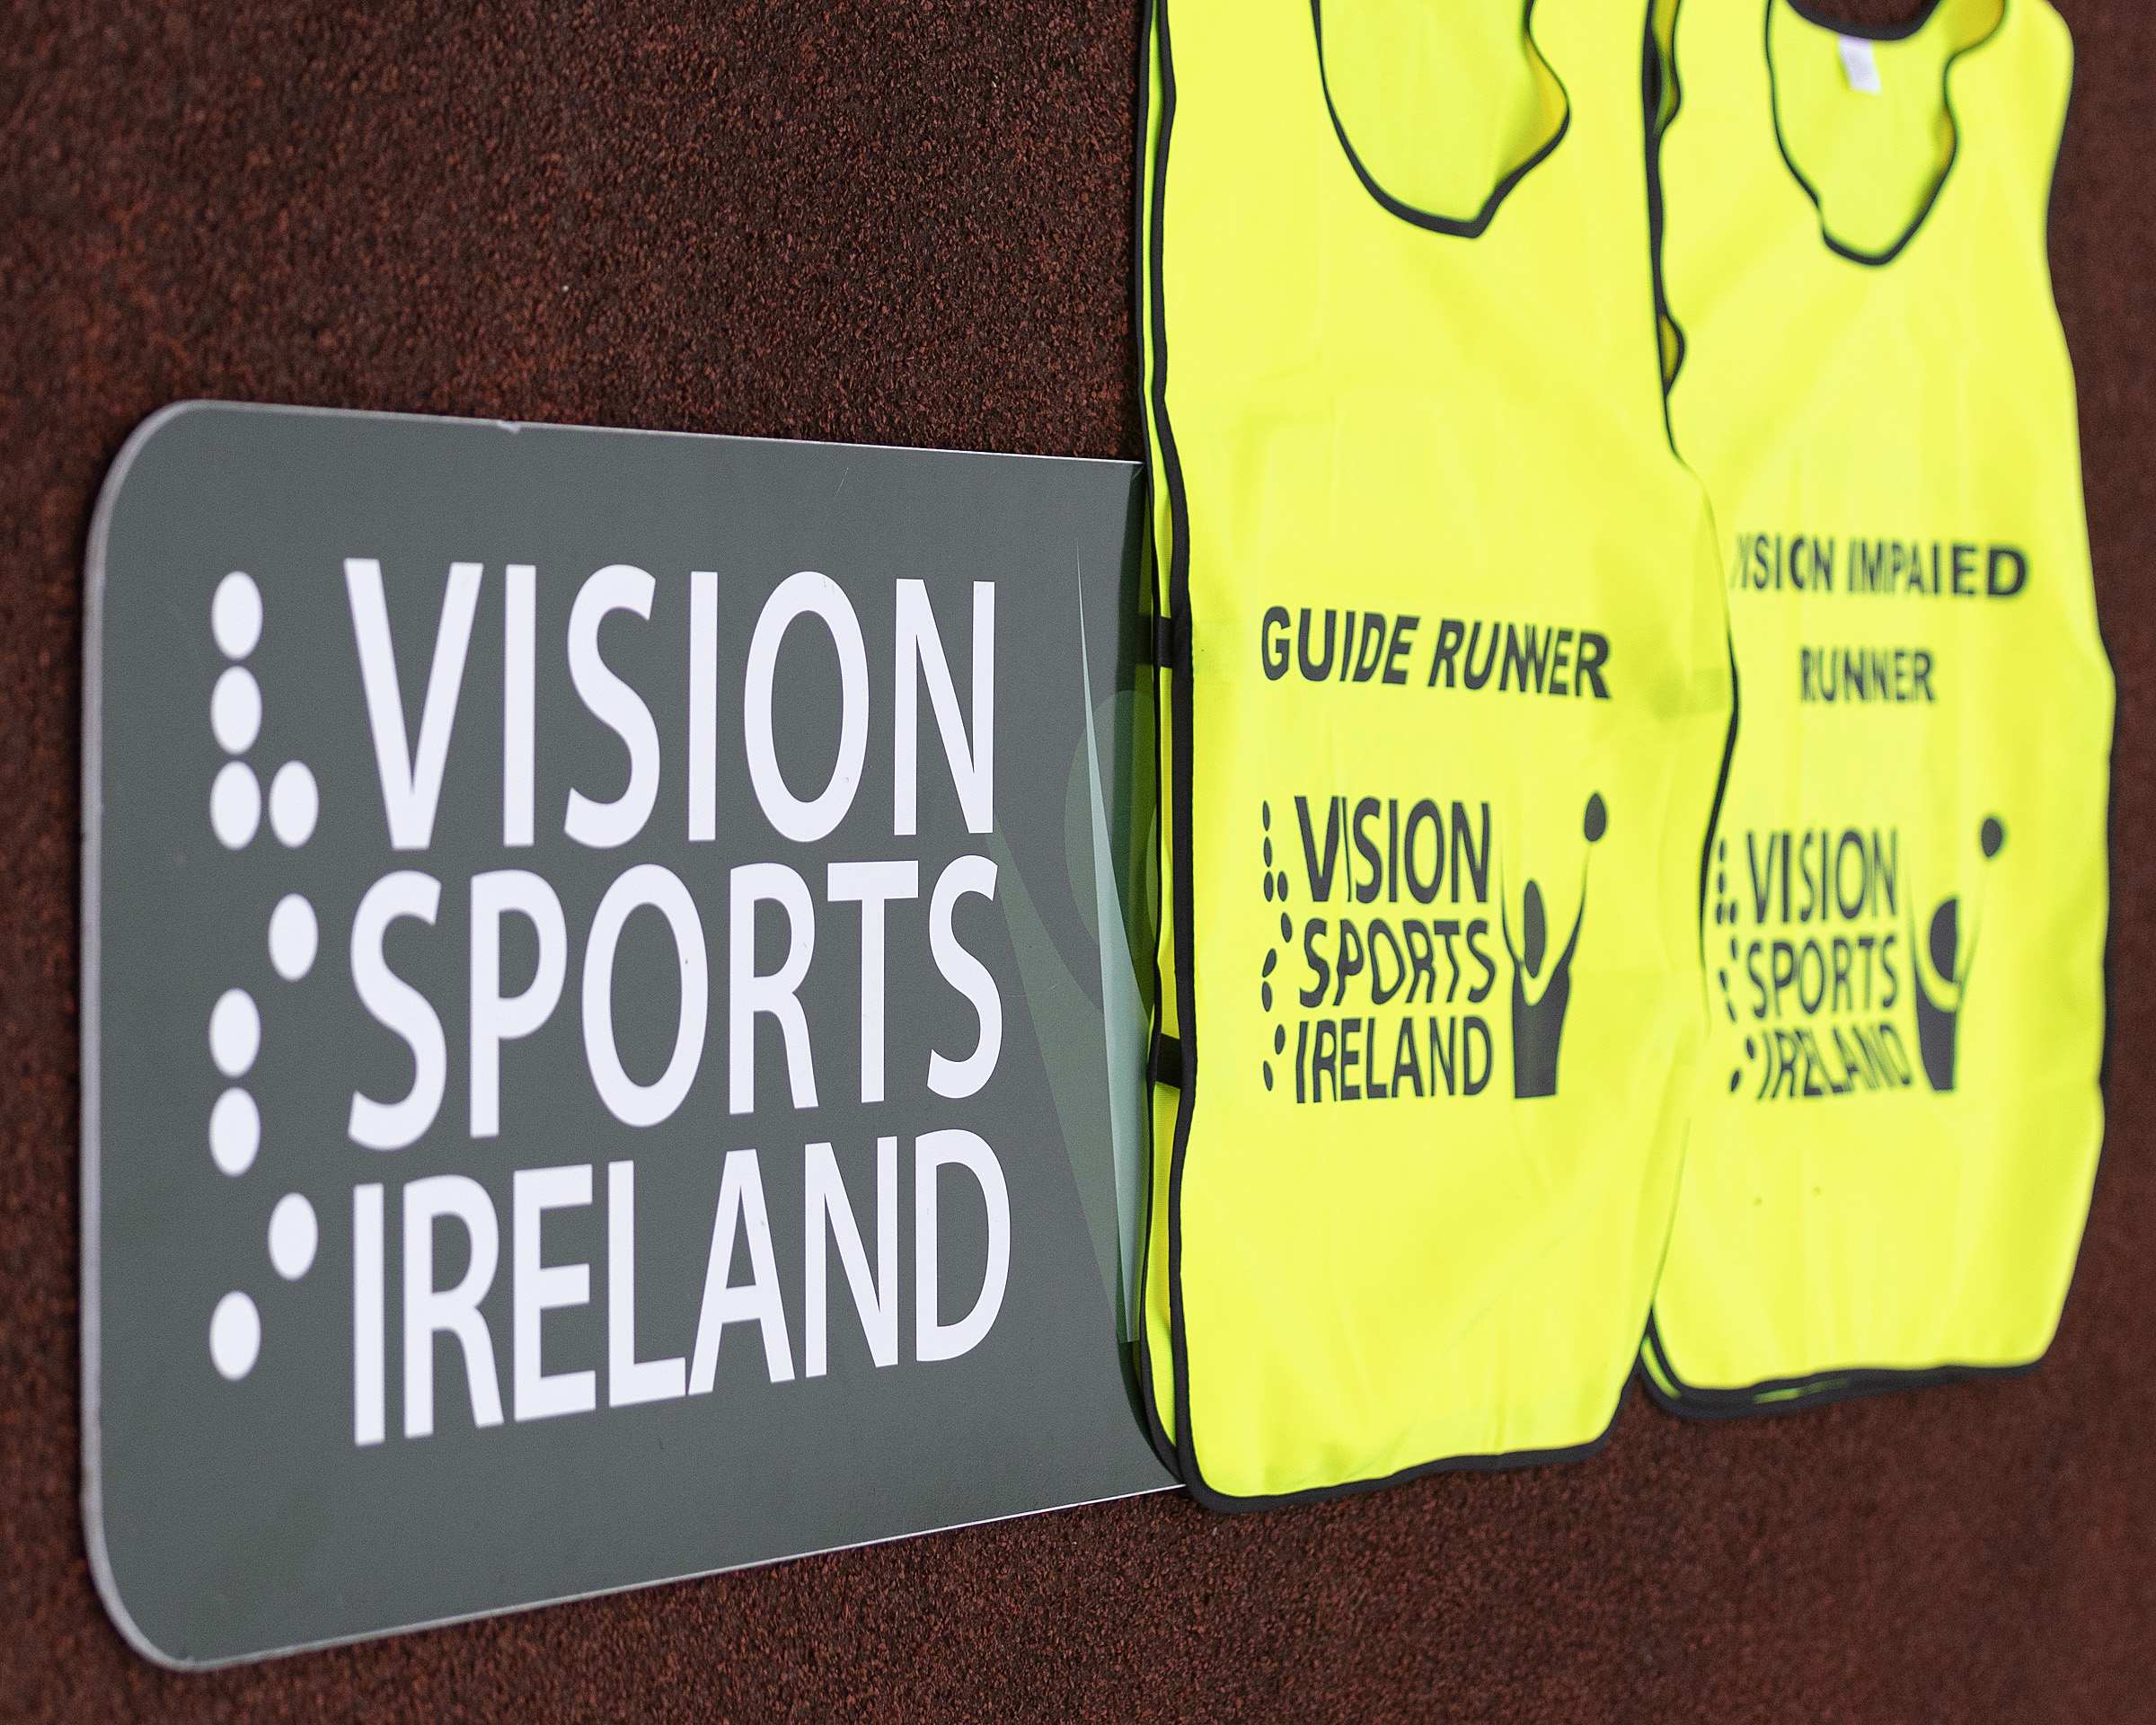 A vision Sports Ireland sign on the ground with a guide runner and vision impaired runner yellow bib on top of it